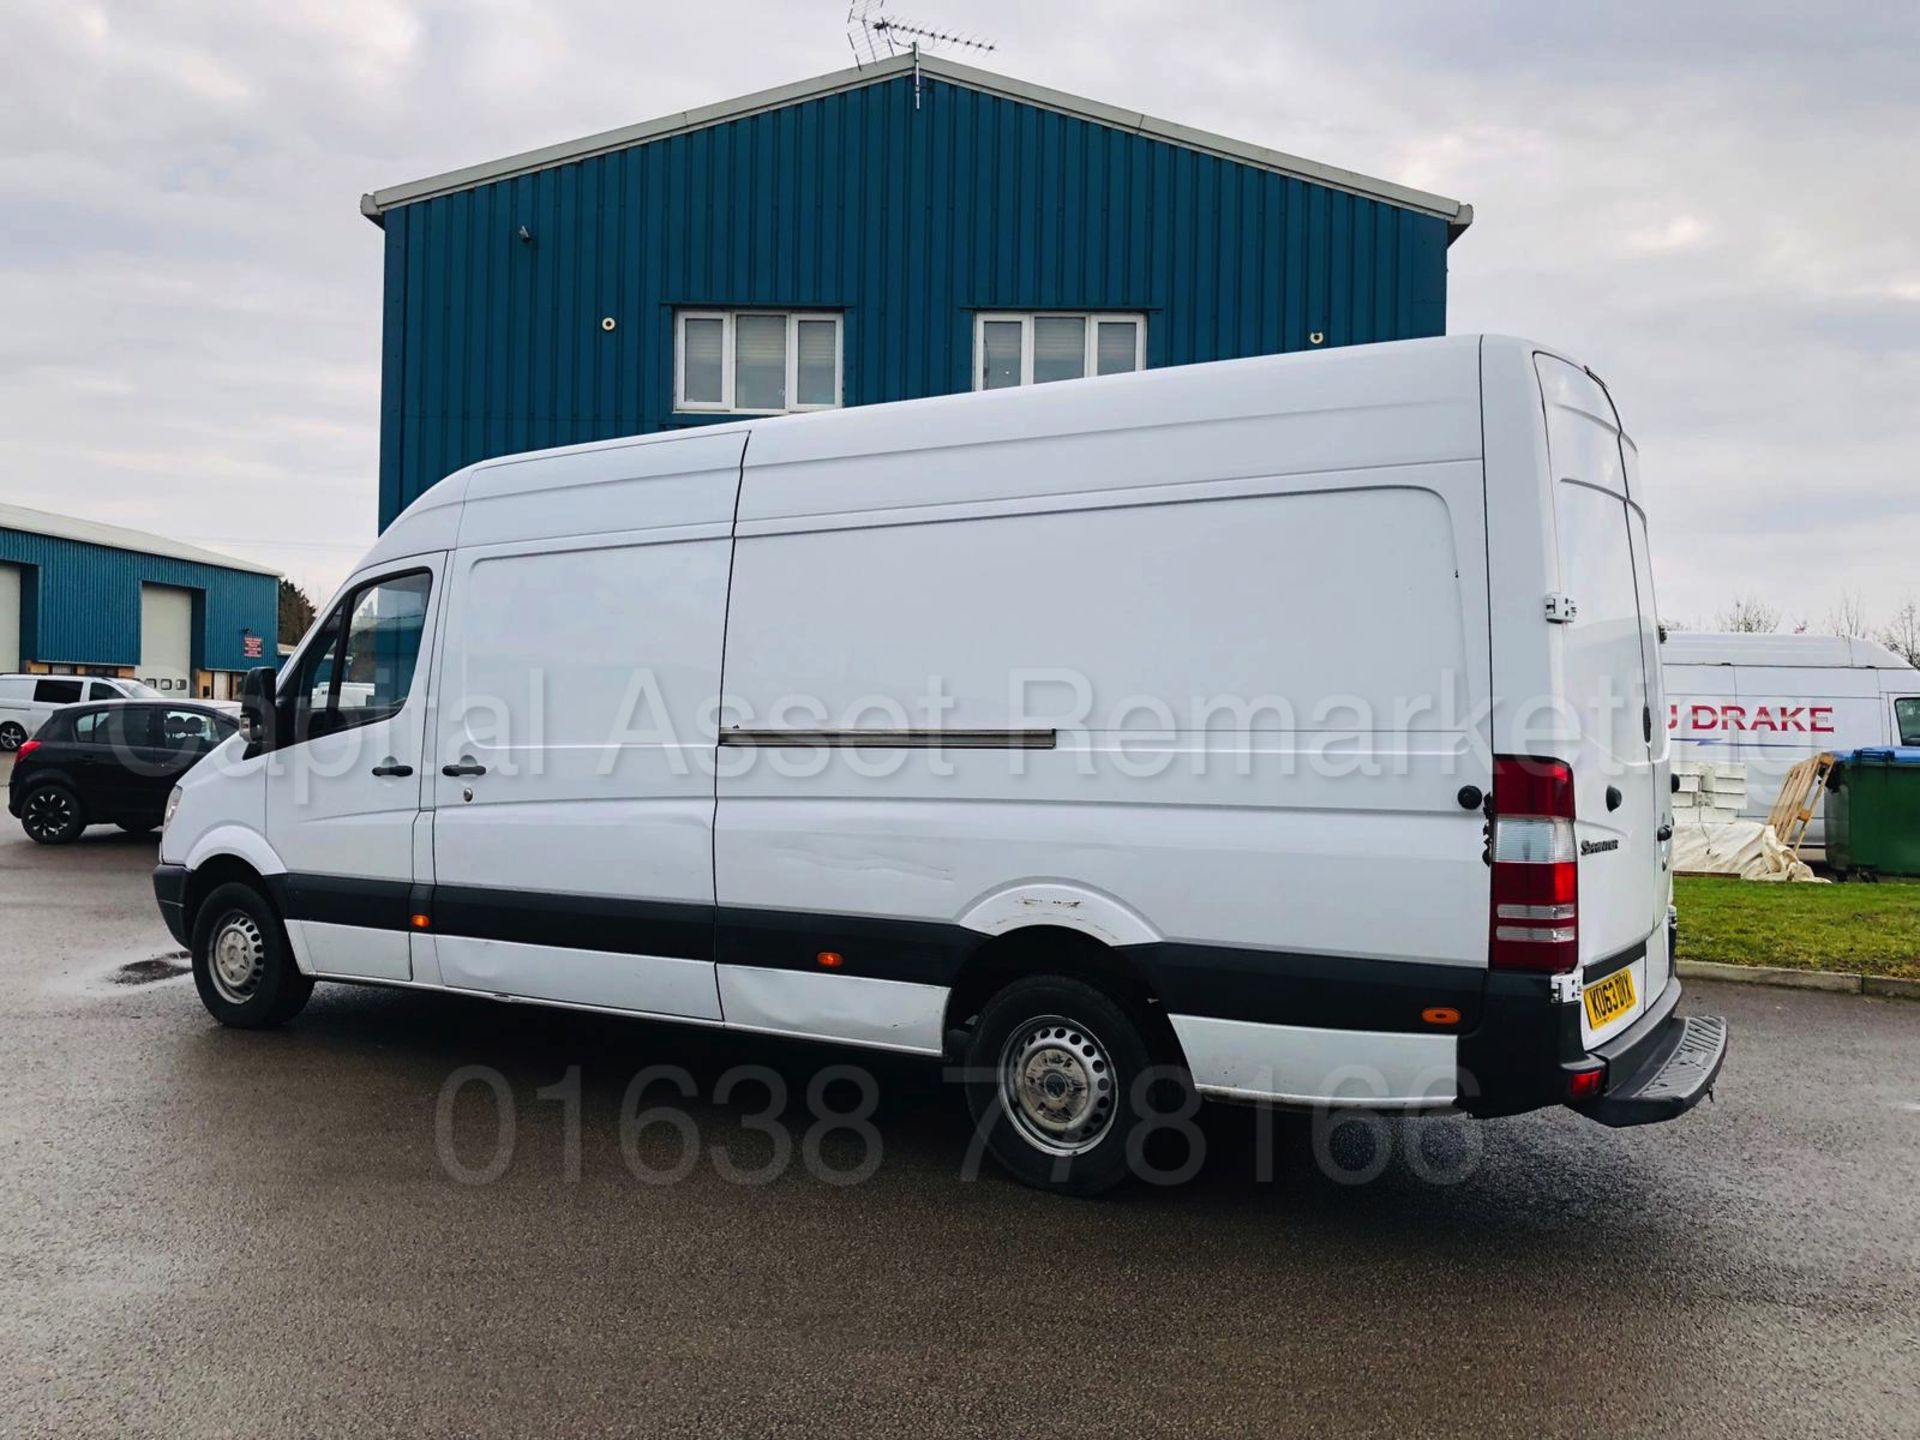 MERCEDES-BENZ SPRINTER 313 CDI *LWB HI-ROOF* (2014 MODEL) '130 BHP - 6 SPEED' (1 OWNER FROM NEW) - Image 9 of 32